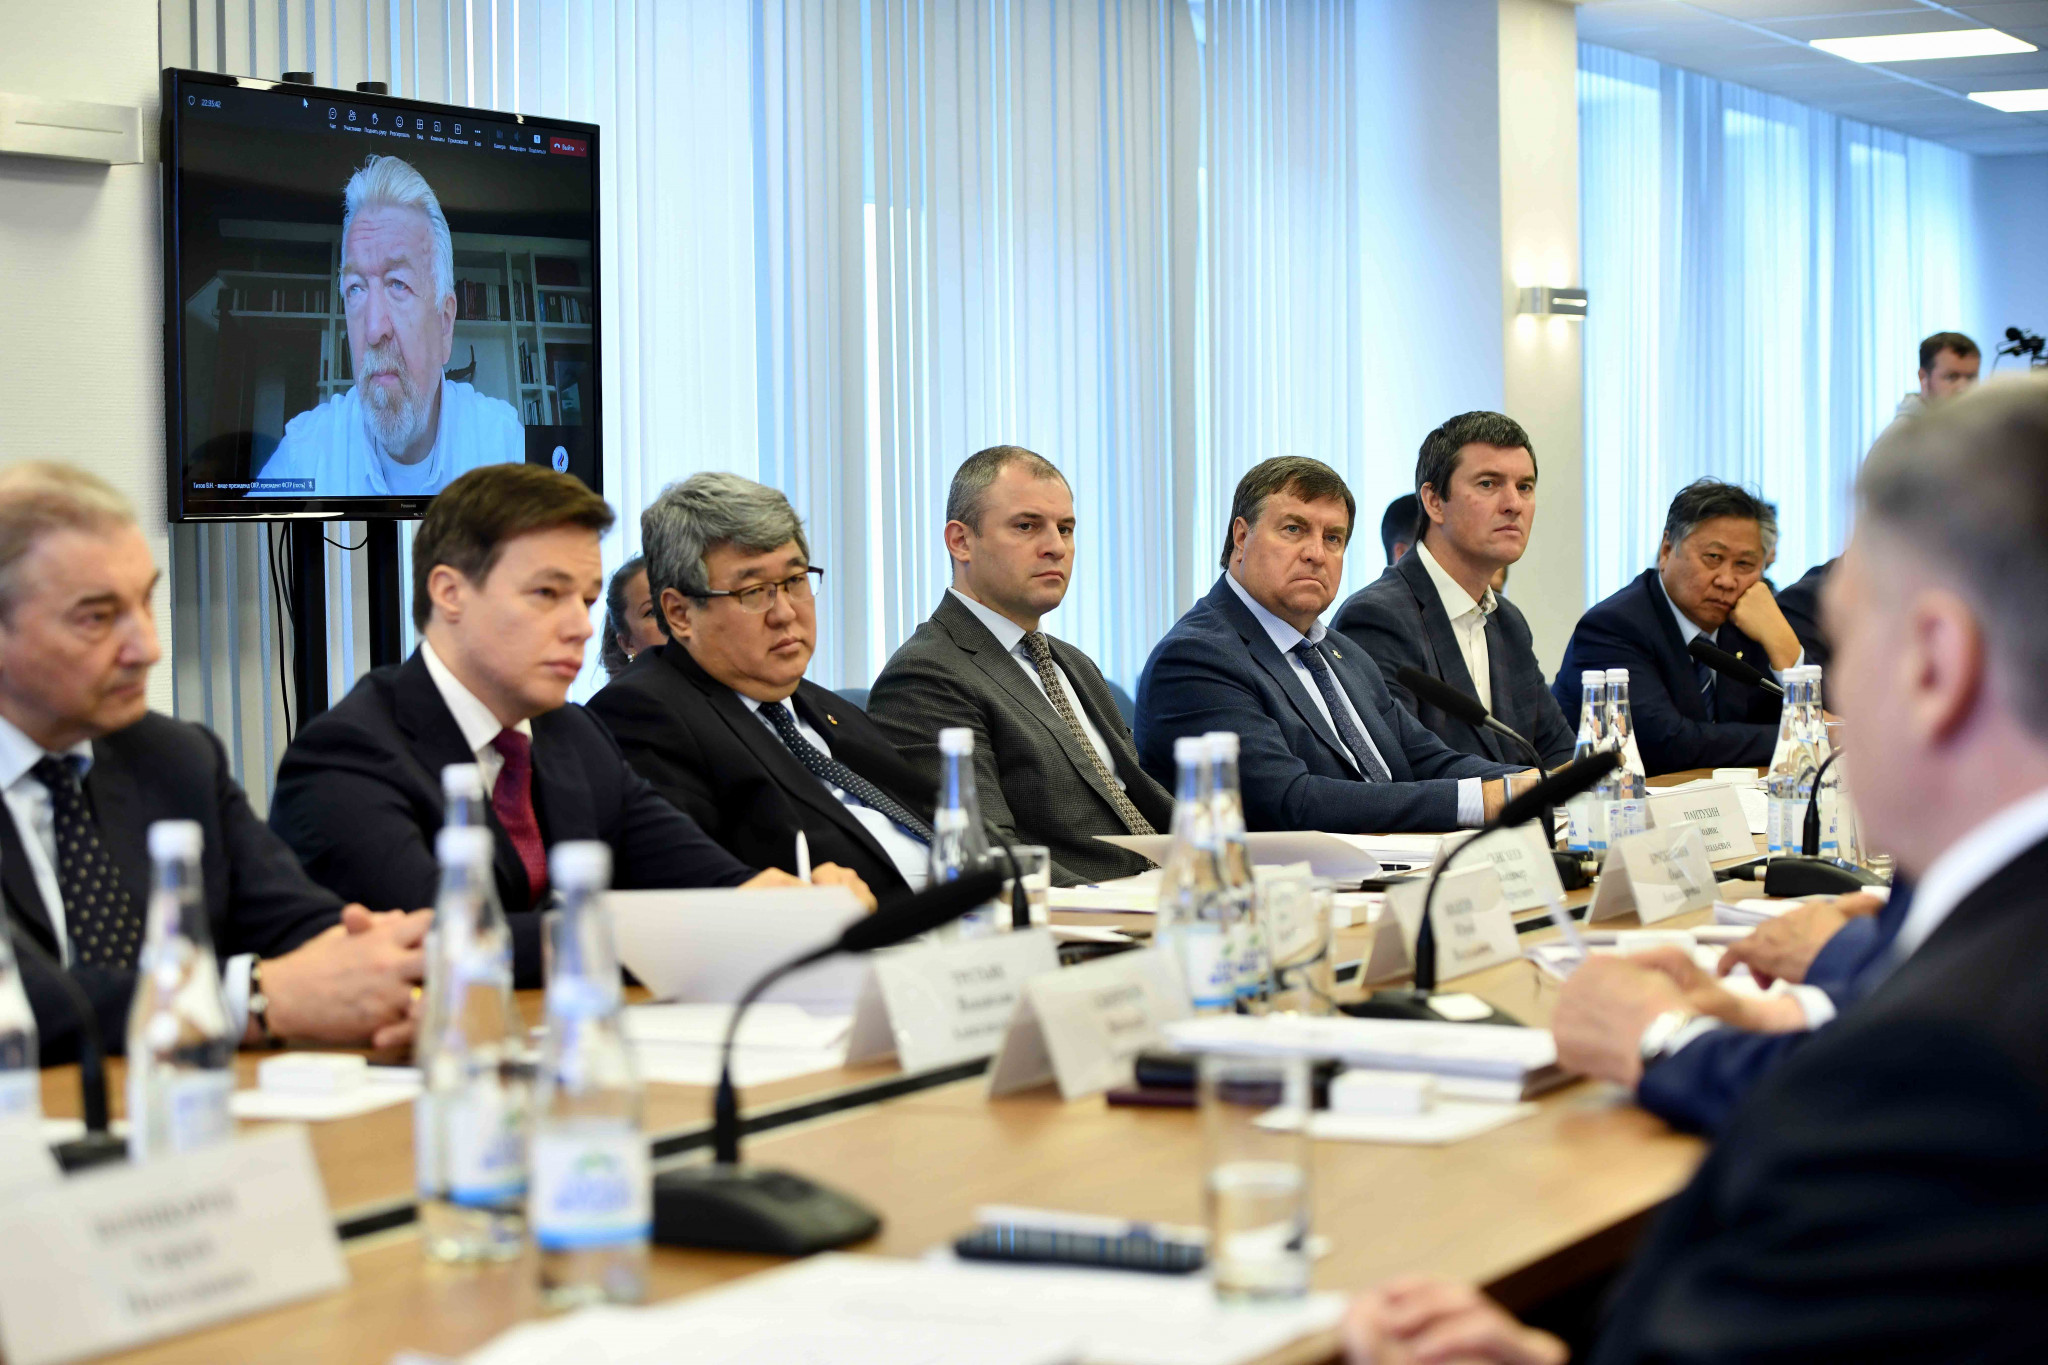 The Russian Olympic Committee Executive Committee met in person to discuss how to ensure its athletes are readmitted to international sport under the country's flag ©ROC